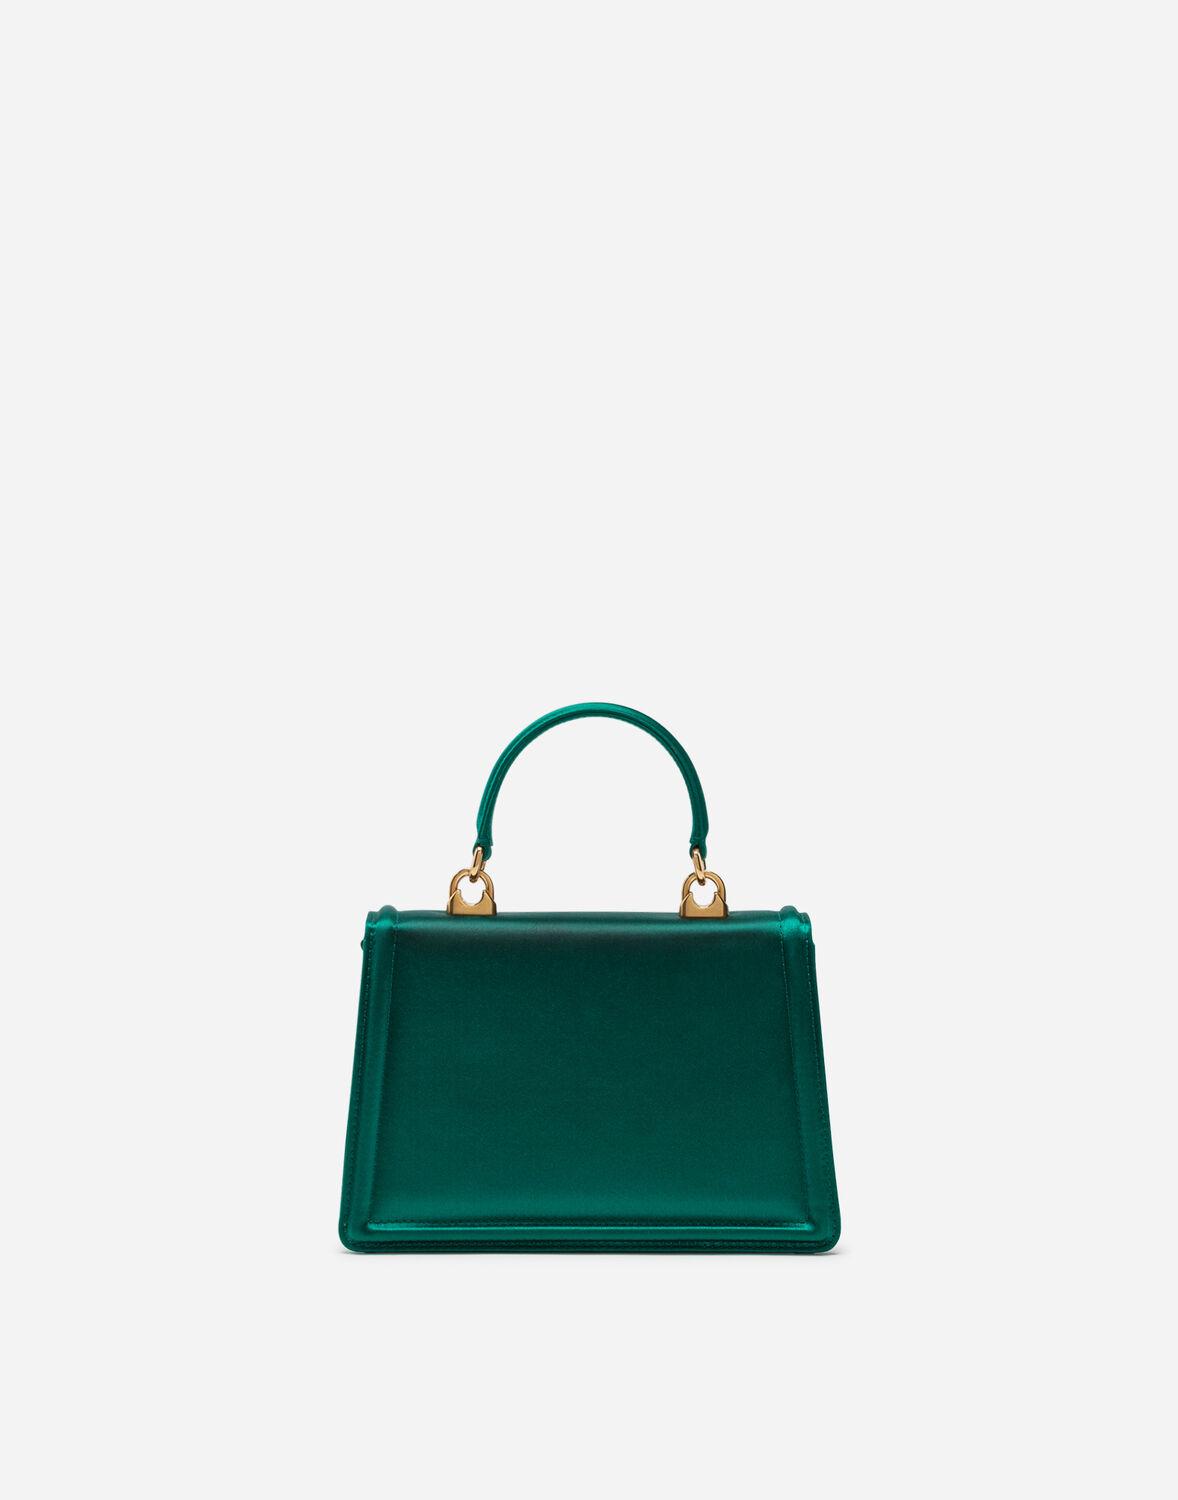 Dolce & Gabbana Green Leather Small Miss Sicily Top Handle Bag